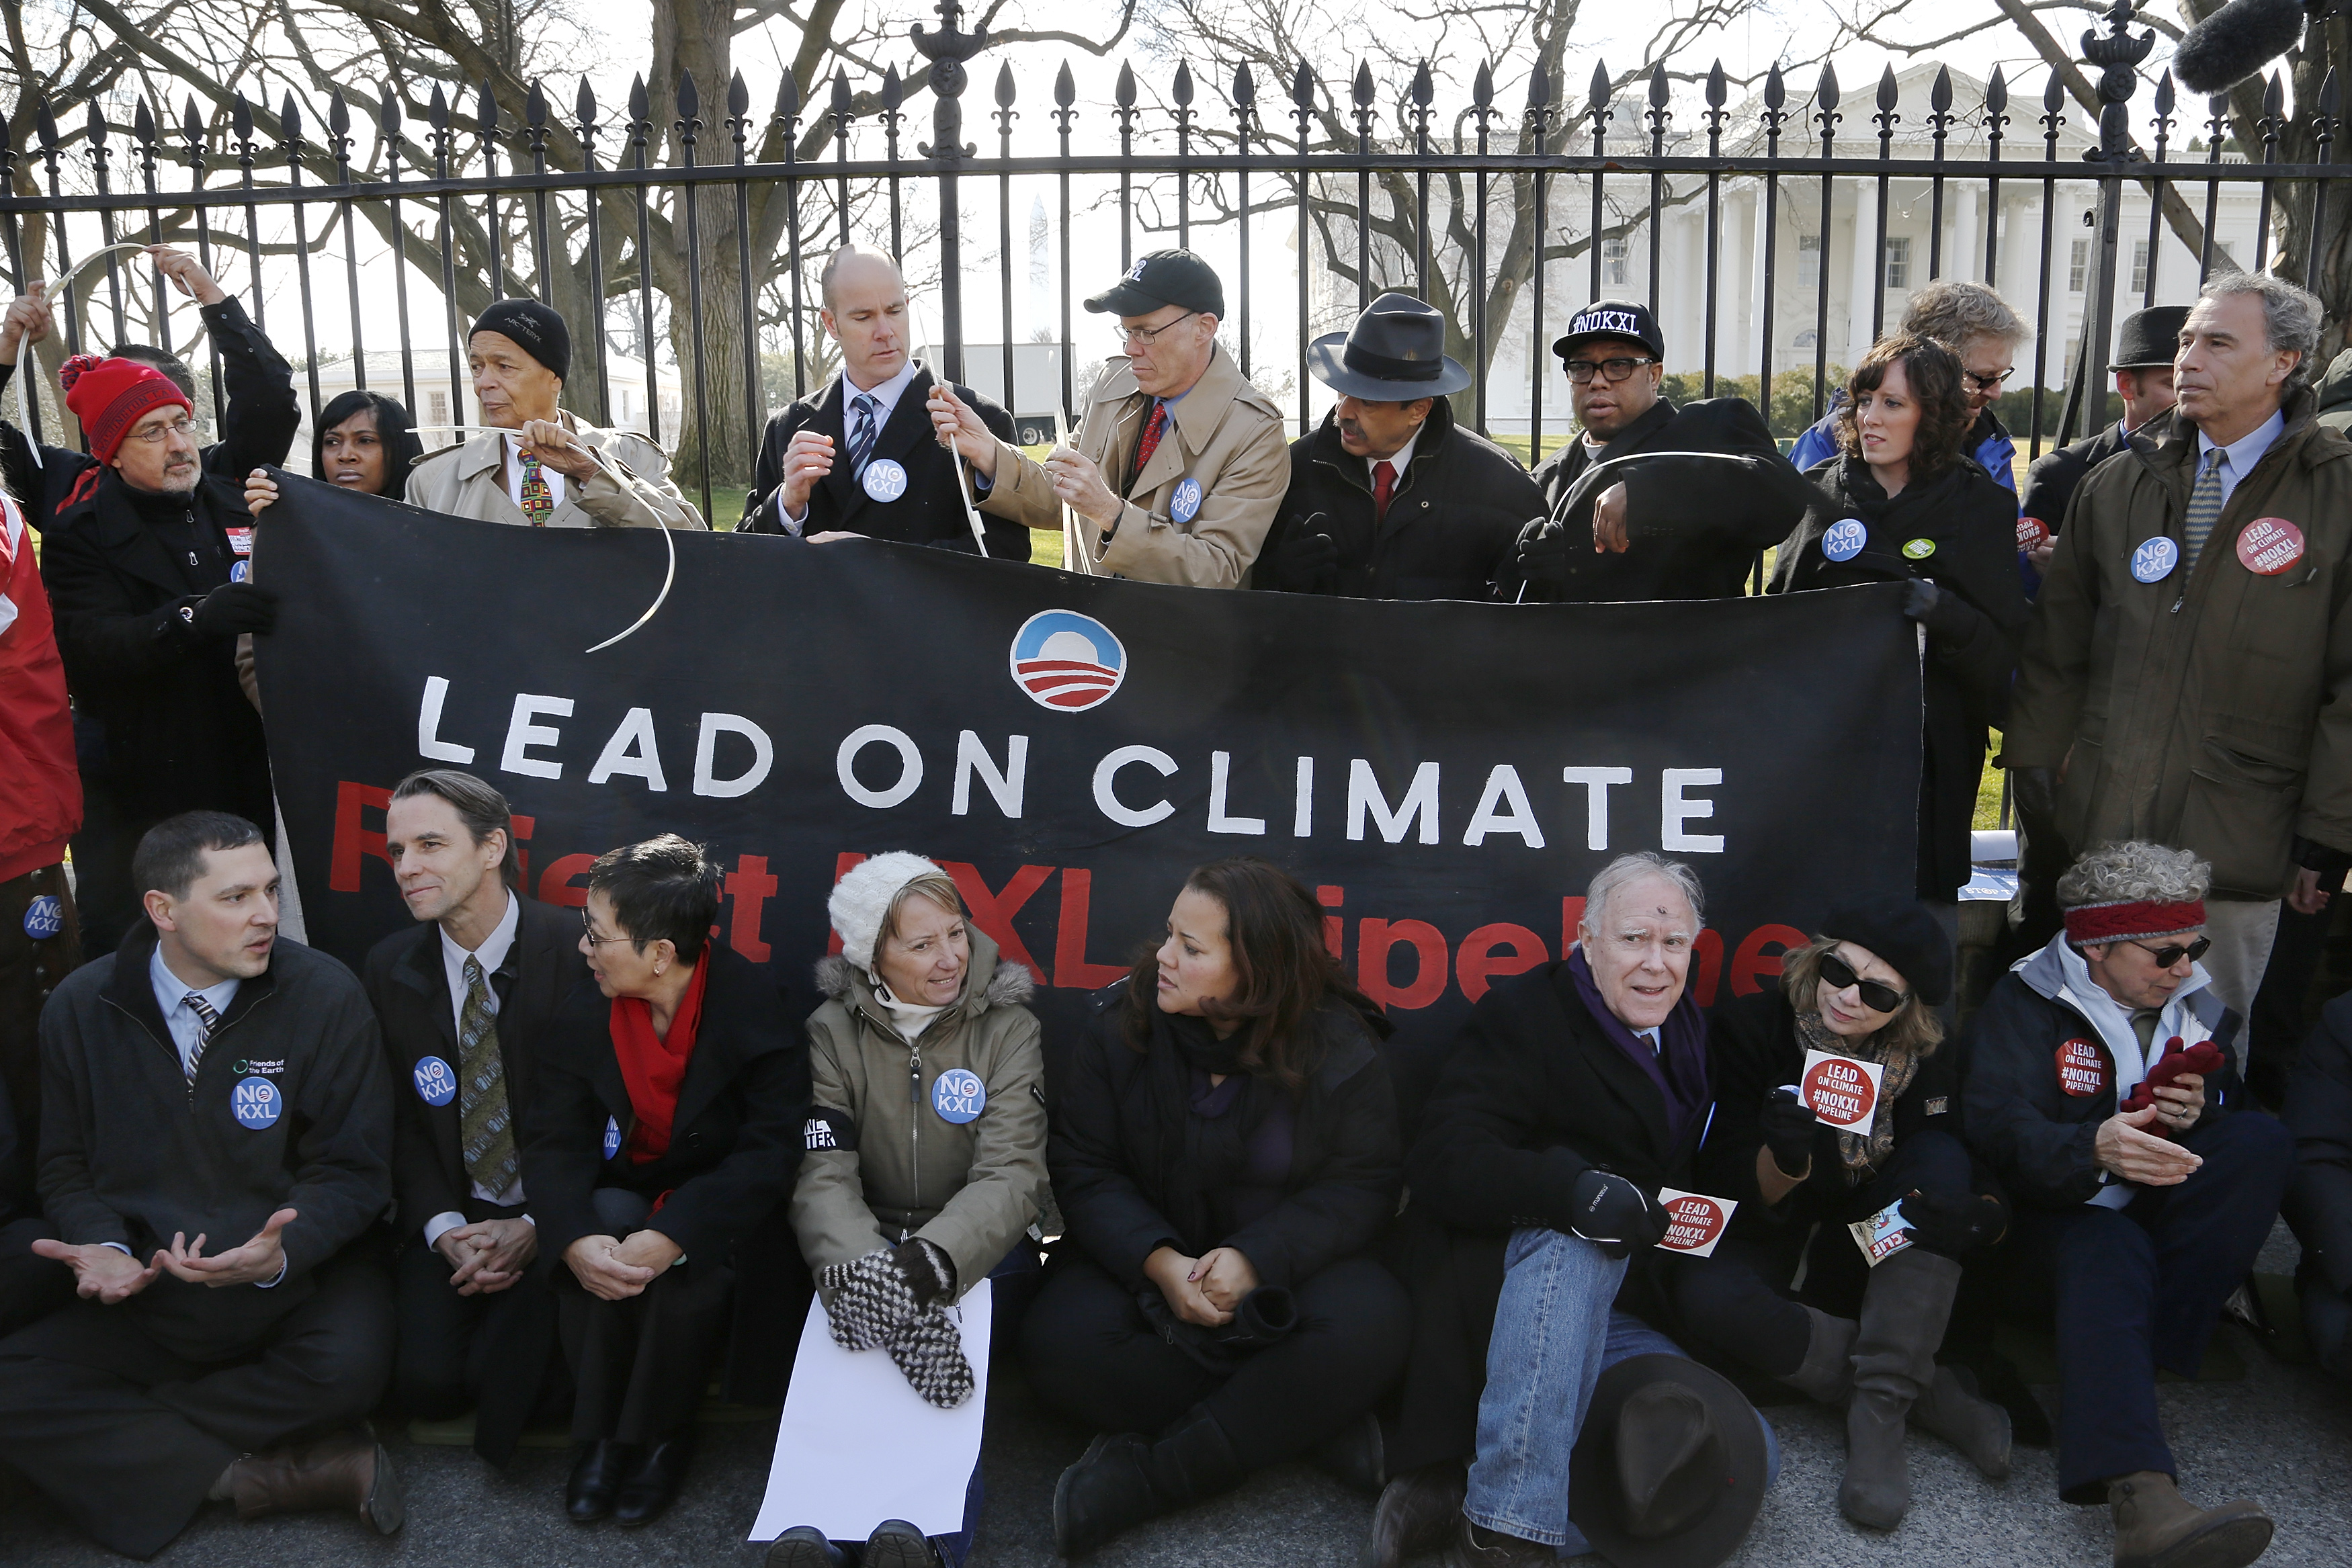 Activists opposed to the Keystone XL tar sands pipeline project tie themselves to the White House fence during an environmental protest in Washington